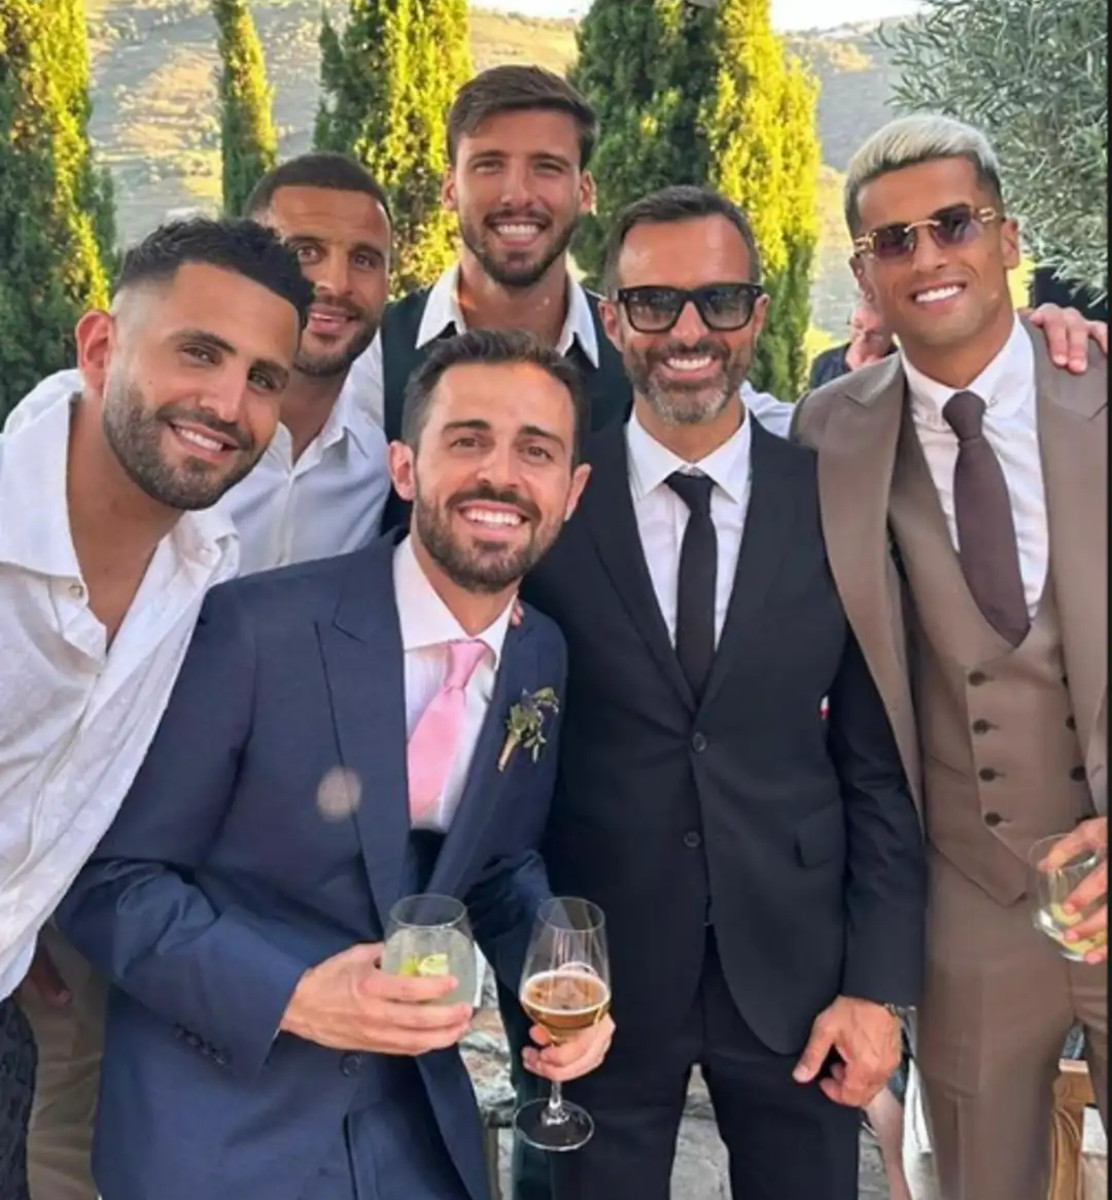 Joao Cancelo (right) posted this photo from the wedding of Bernardo Silva (pink tie) and Ines Tomaz (not pictured) in 2023. It also features (left to right) Riyad Mahrez, Kyle Walker, Ruben Dias and Jorge Mendes